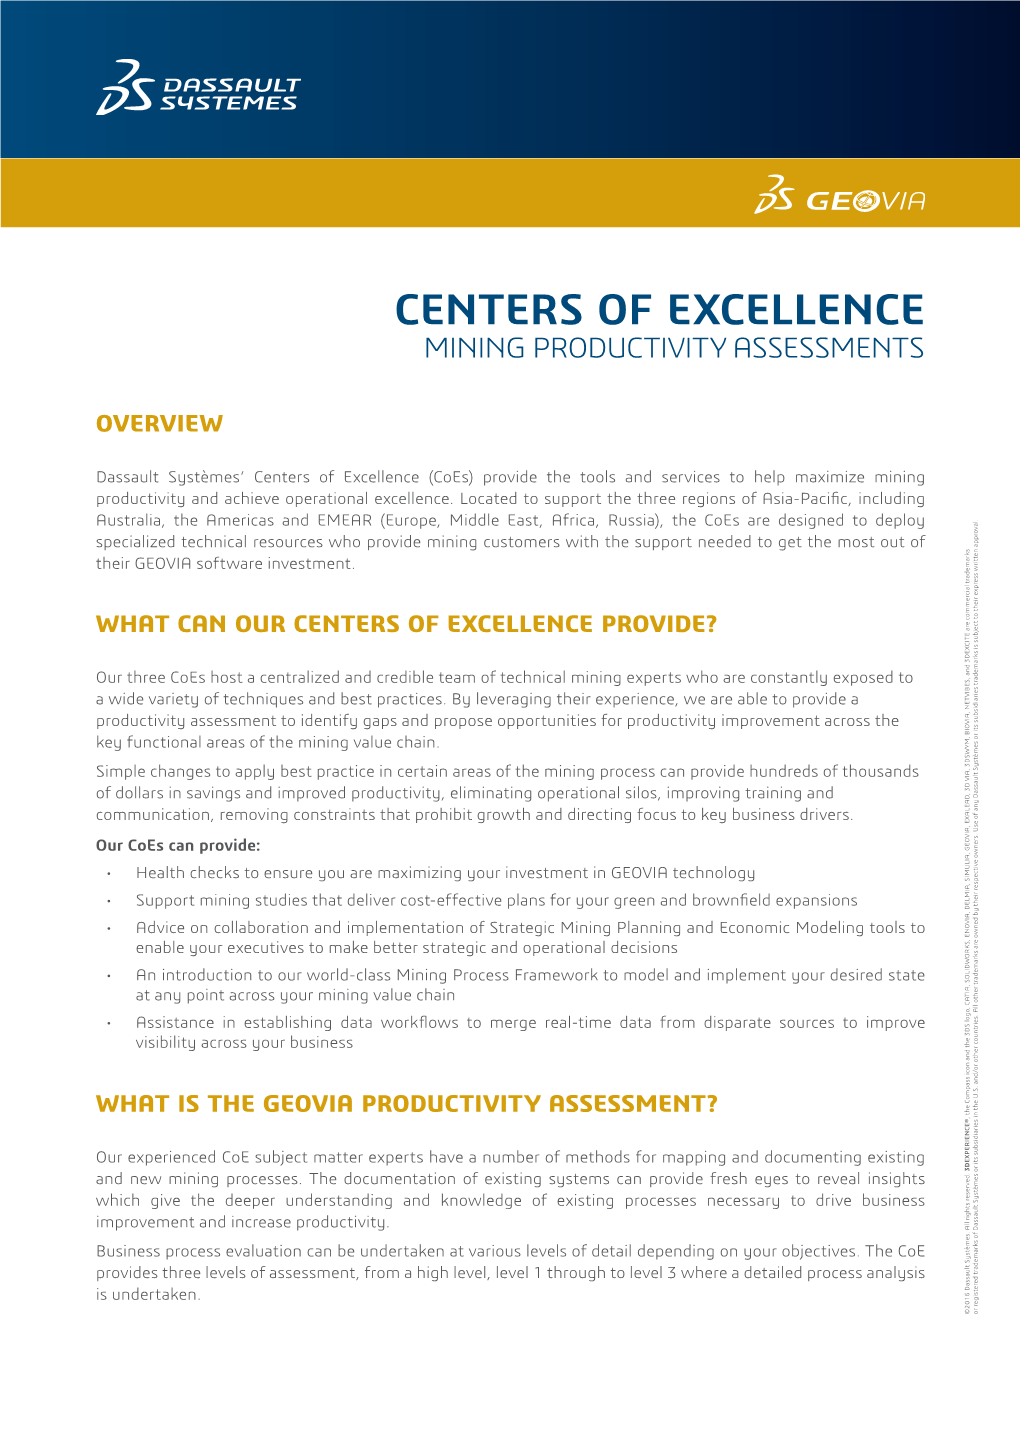 Centers of Excellence Mining Productivity Assessments